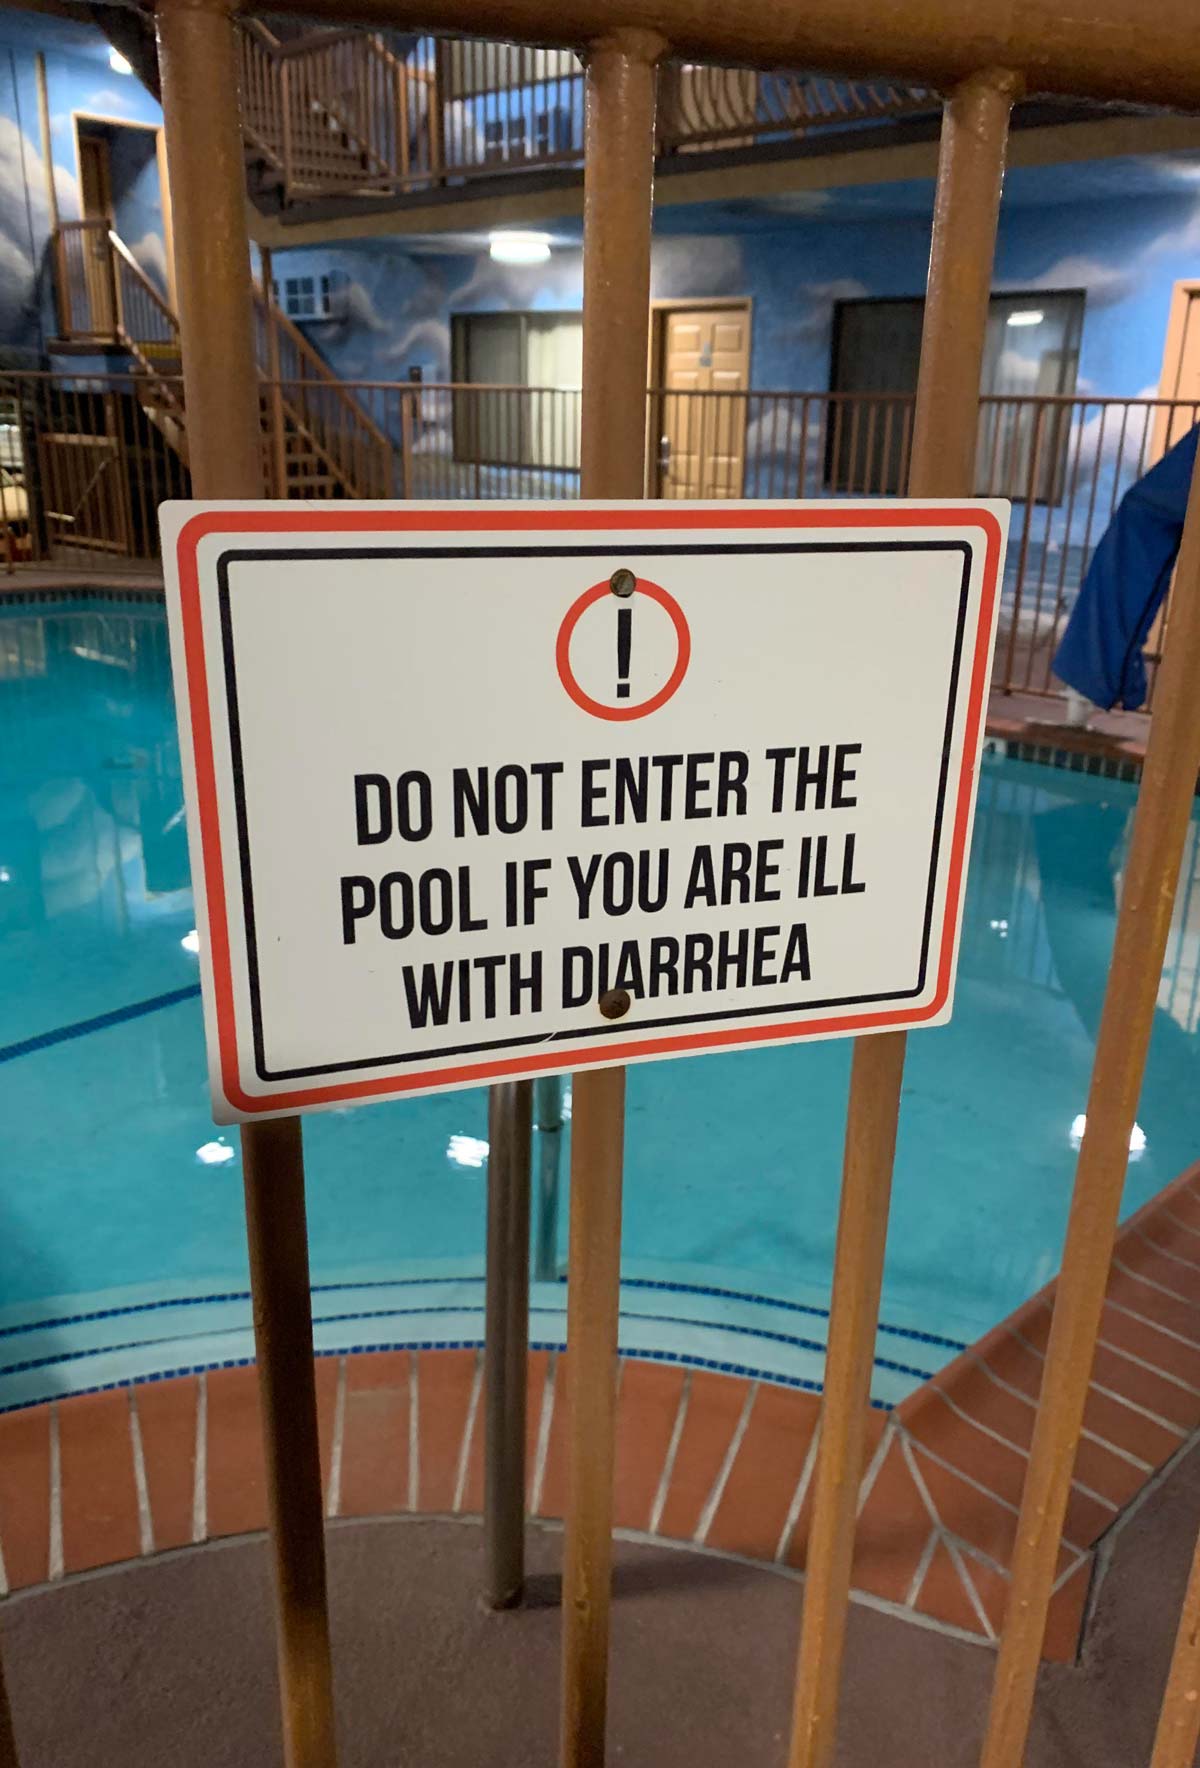 I’ve never seen a hotel pool sign so blunt before